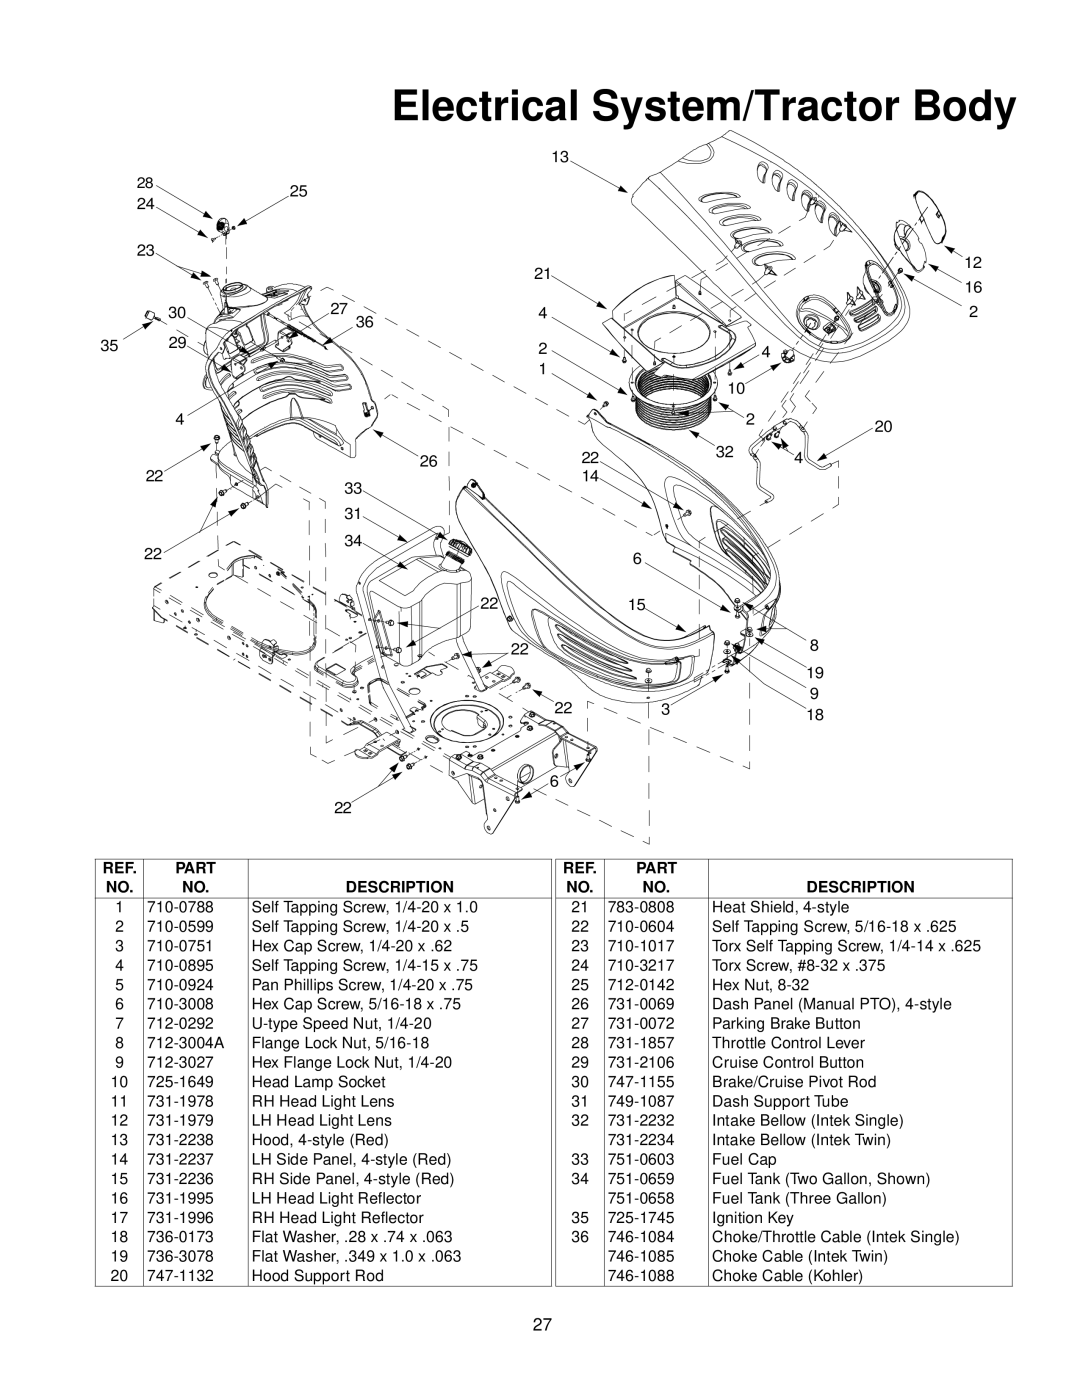 Troy-Bilt 604 manual Electrical System/Tractor Body 